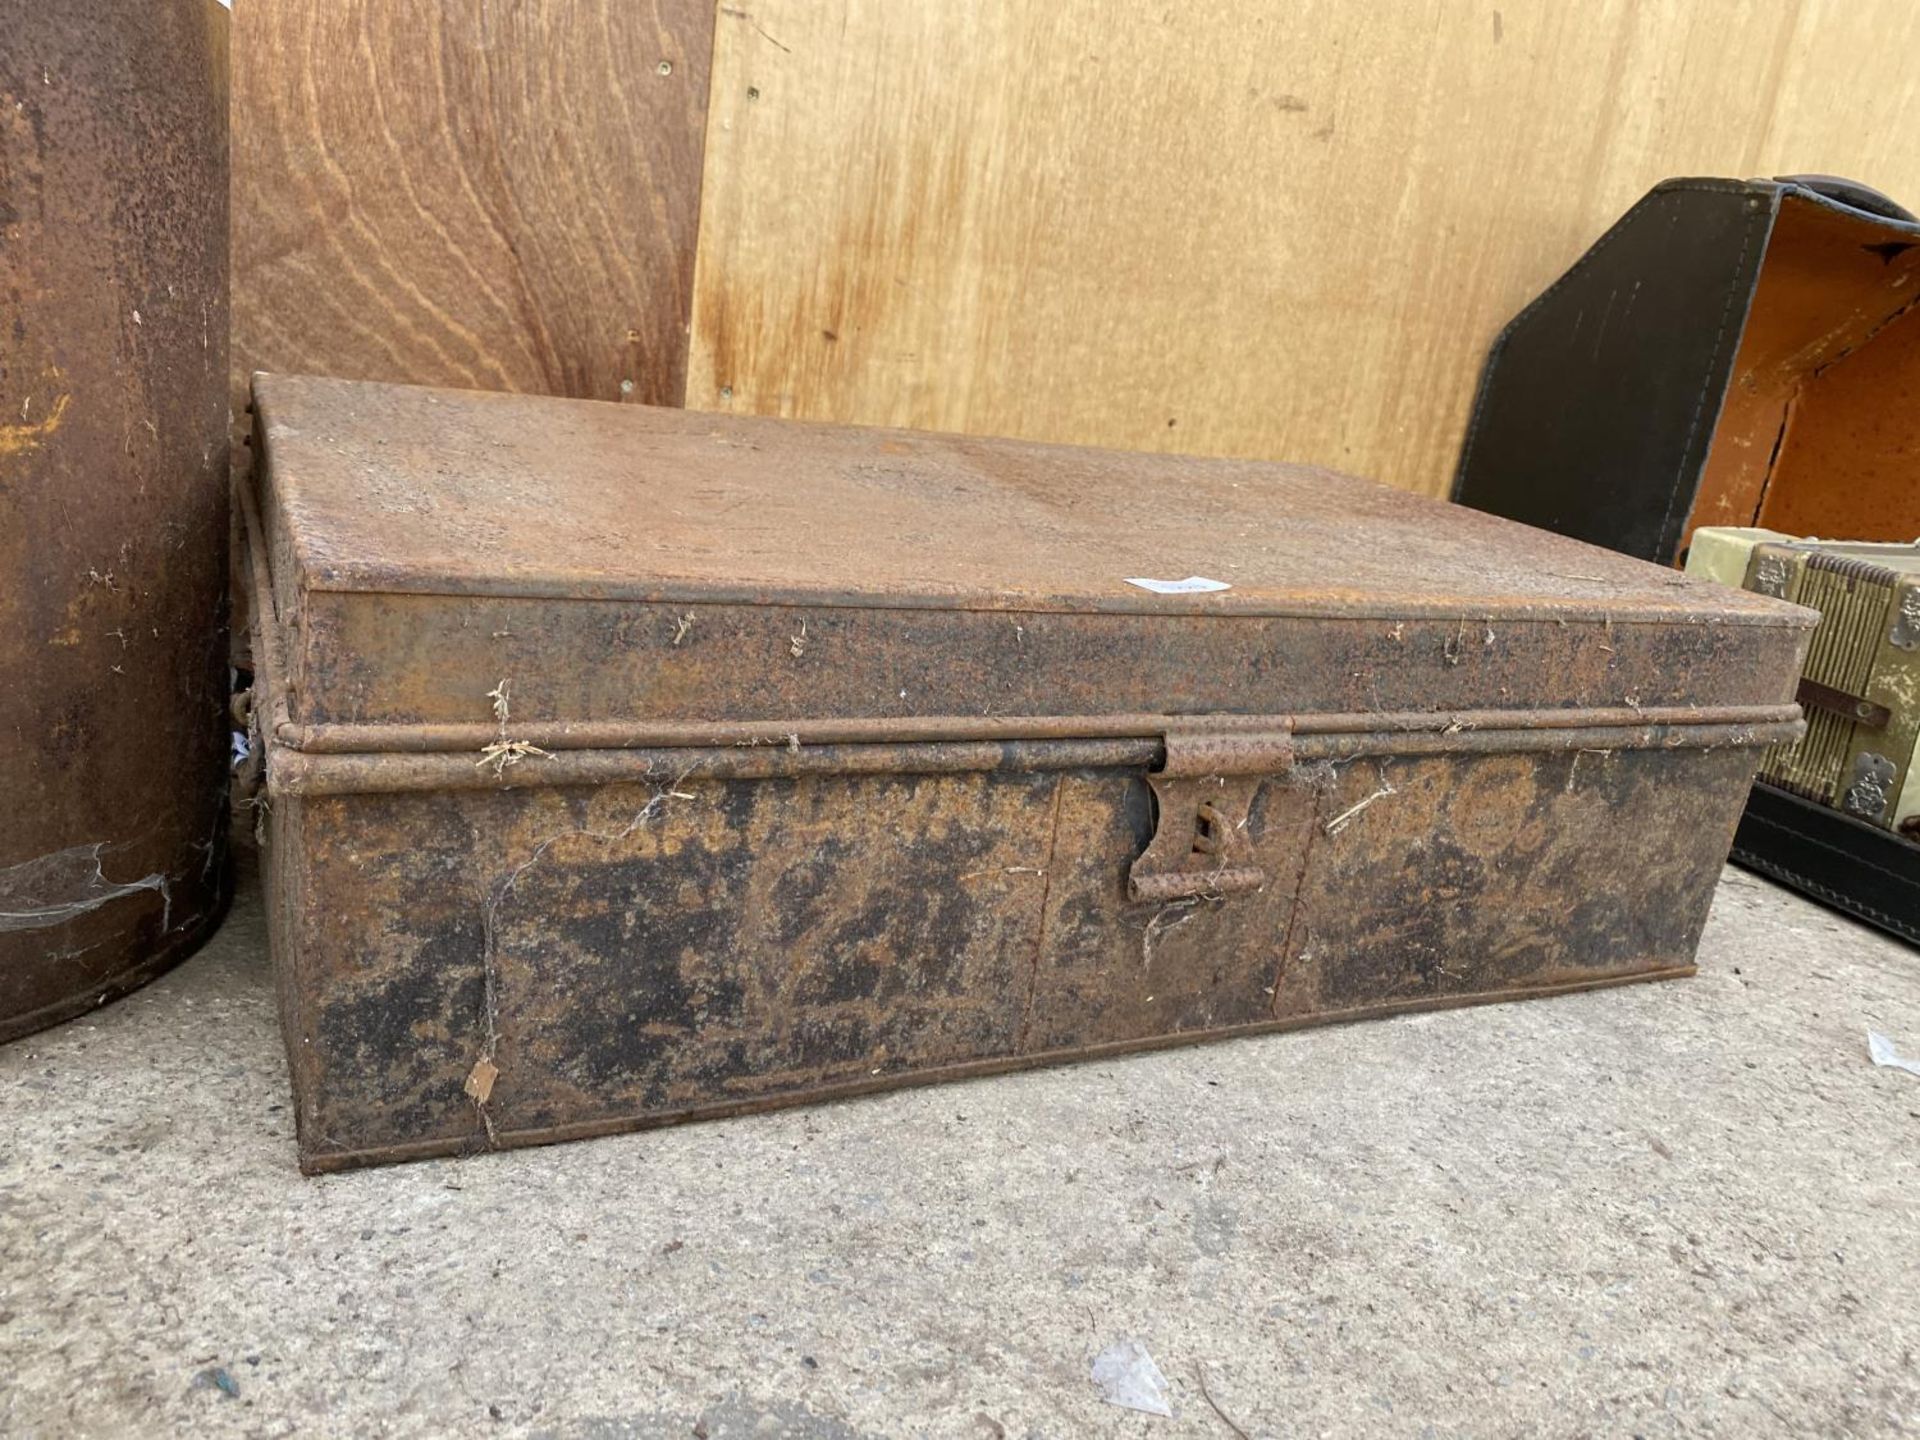 A VINTAGE METAL STORAGE TRUNK AND A FURTHER VINTAGE OIL DRUM - Image 3 of 4